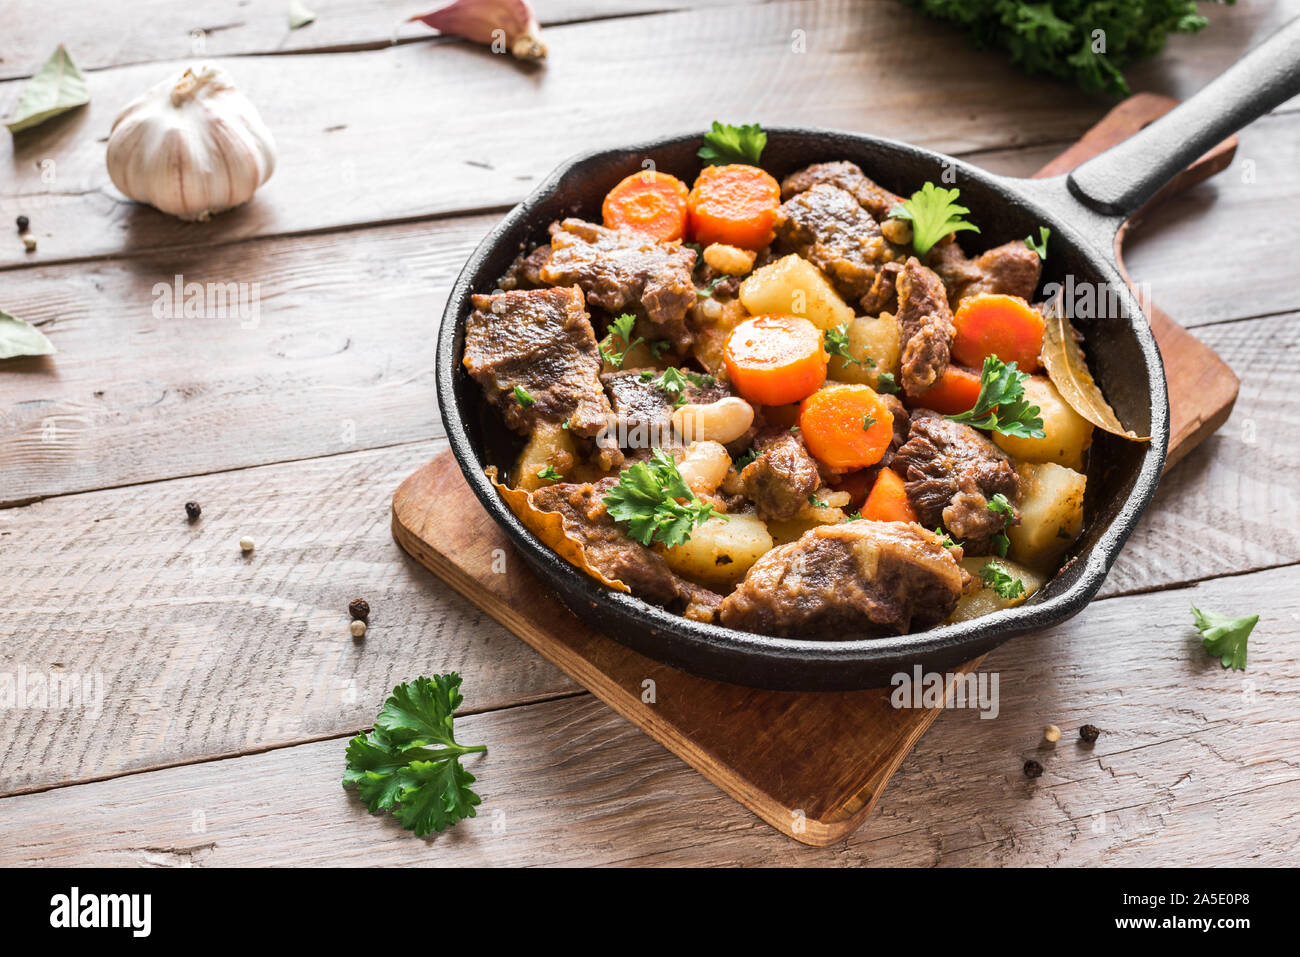 Beef meat stewed with potatoes, carrots and spices on wooden background, copy space. Homemade winter comfort food - slow cooked meat stew. Stock Photo